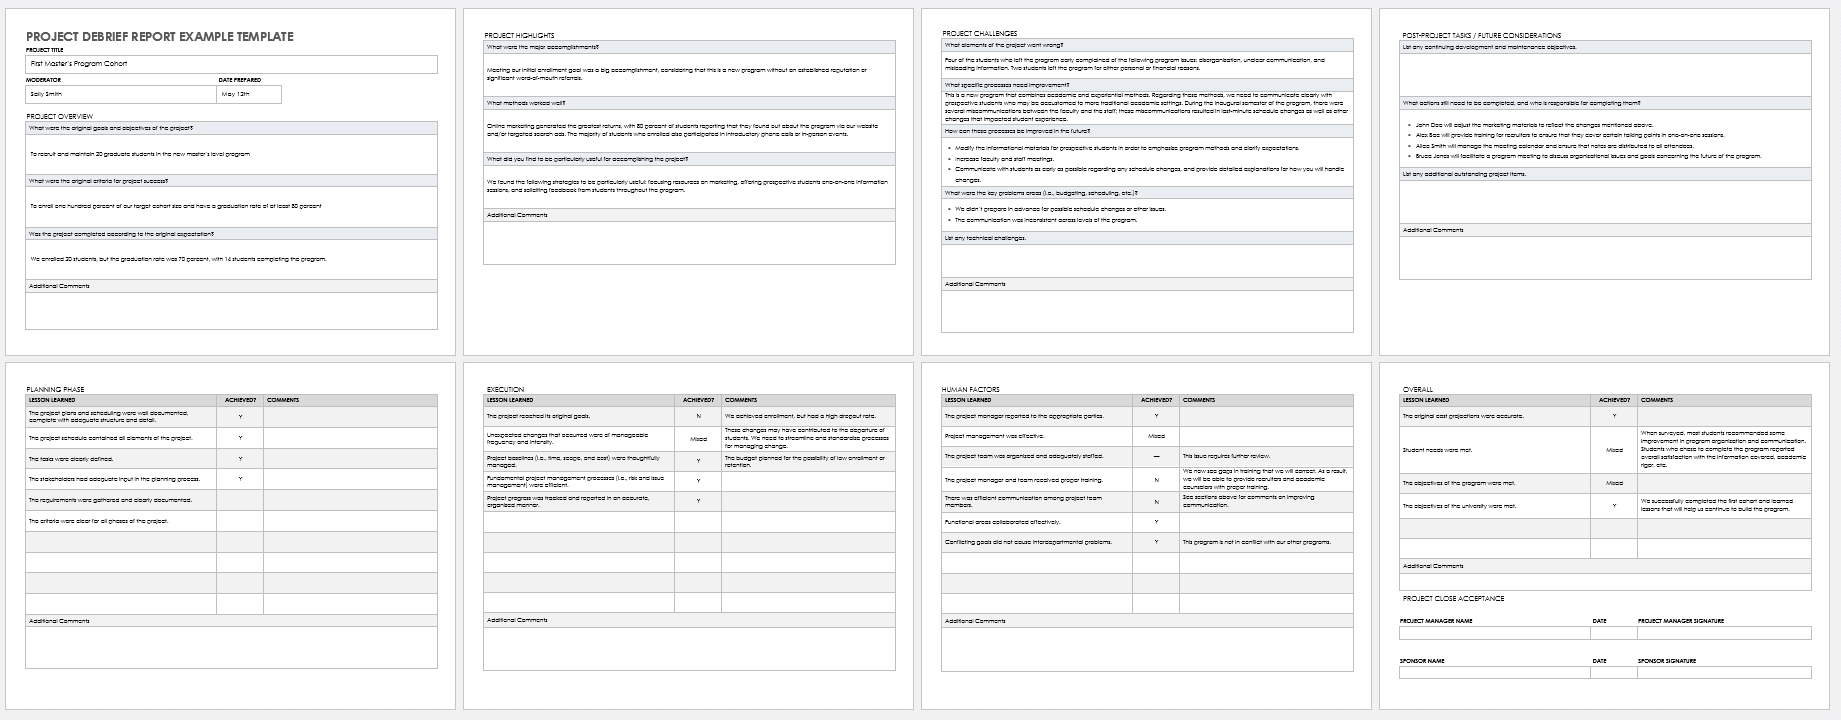 Project Debrief Report Example Template